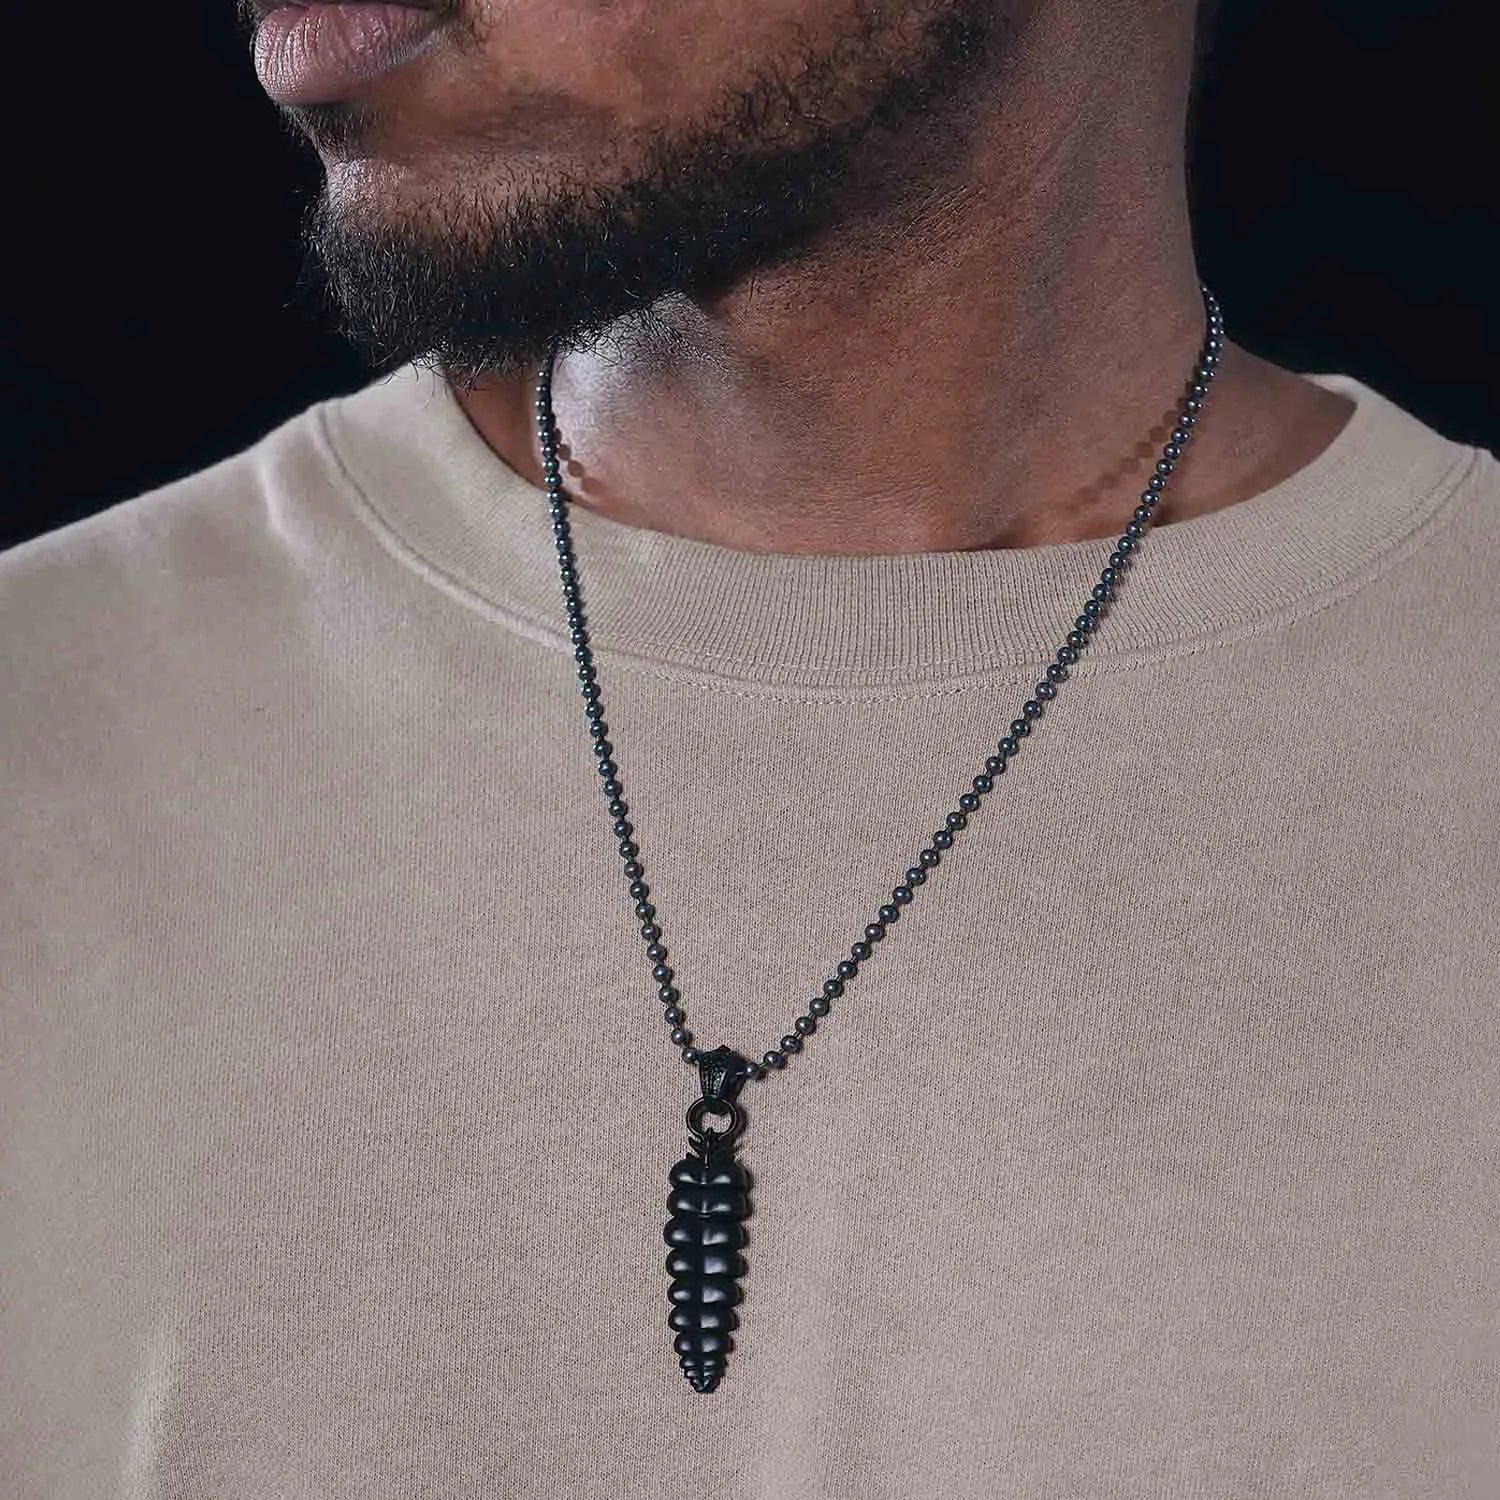 Animal Jewelry Club — Recommended 7 Men's Wearing Accessories Men's...